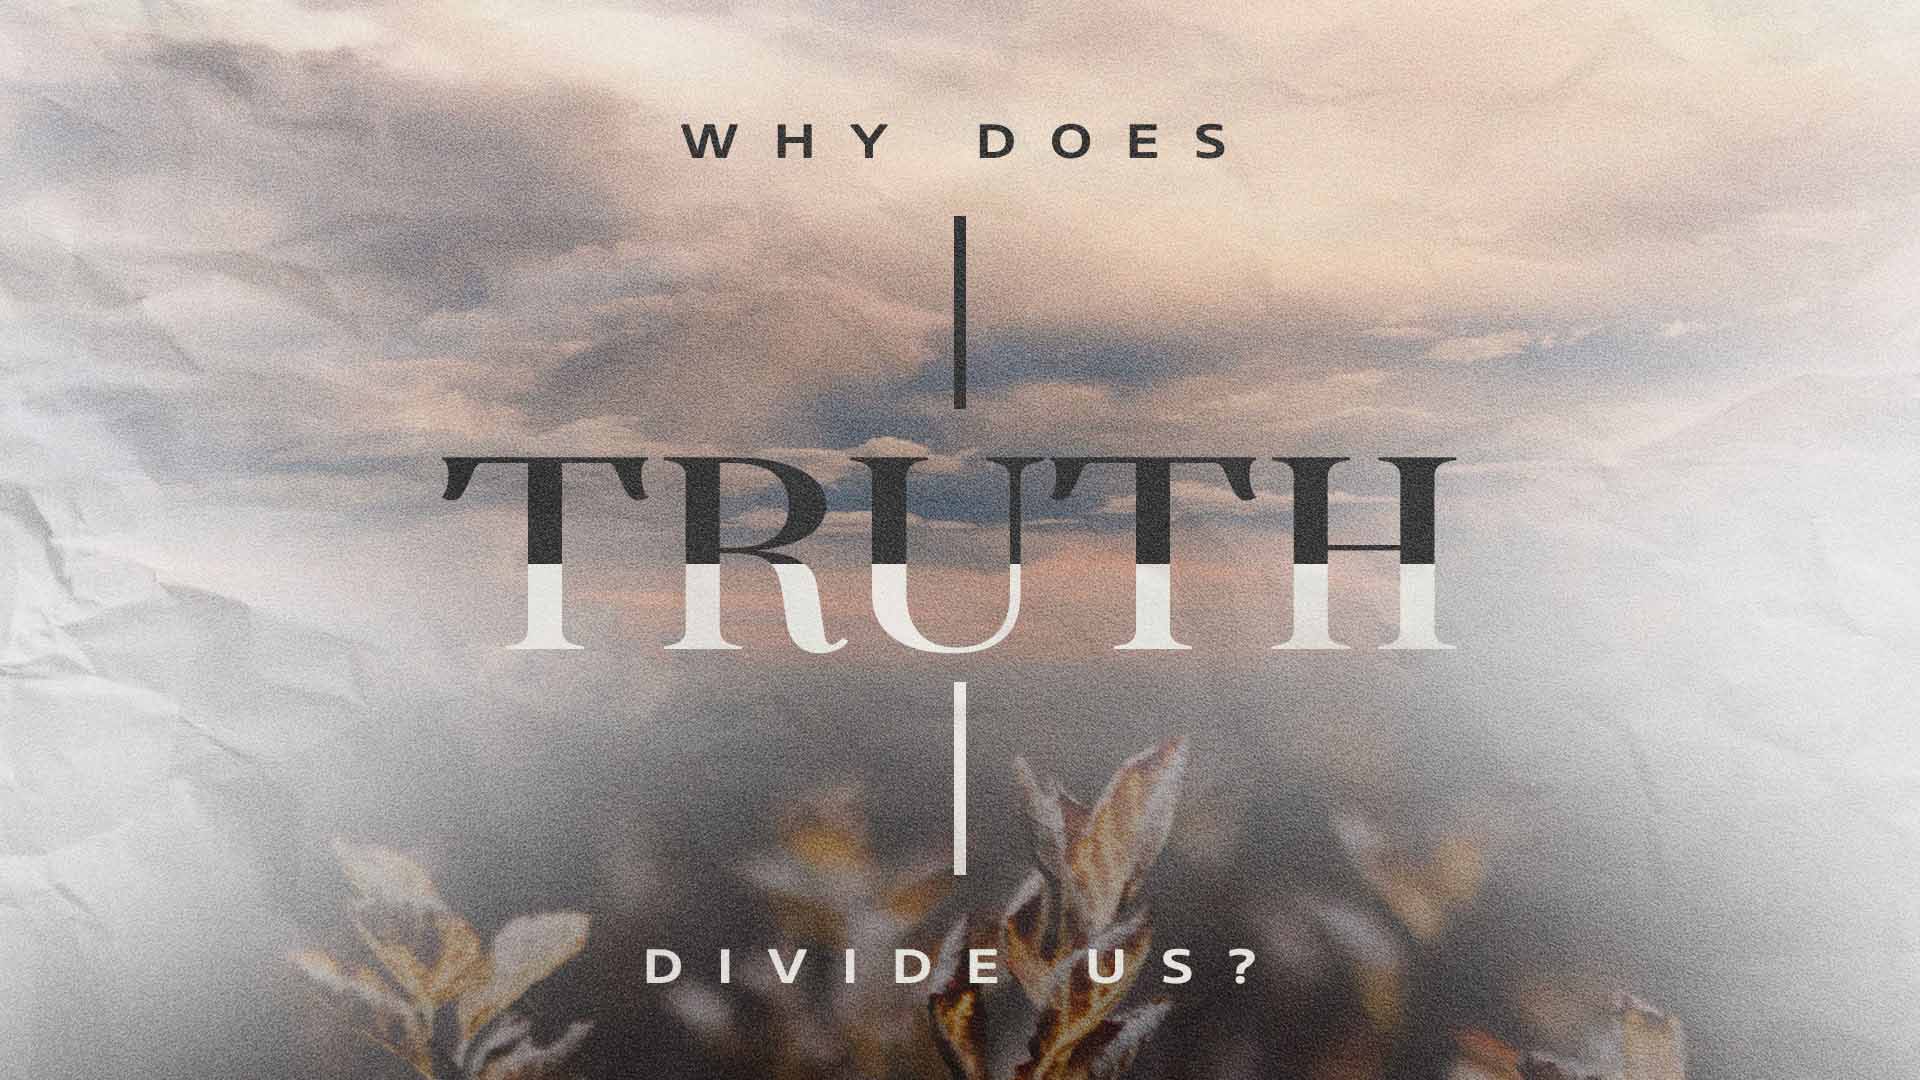 Why Does Truth Divide Us?